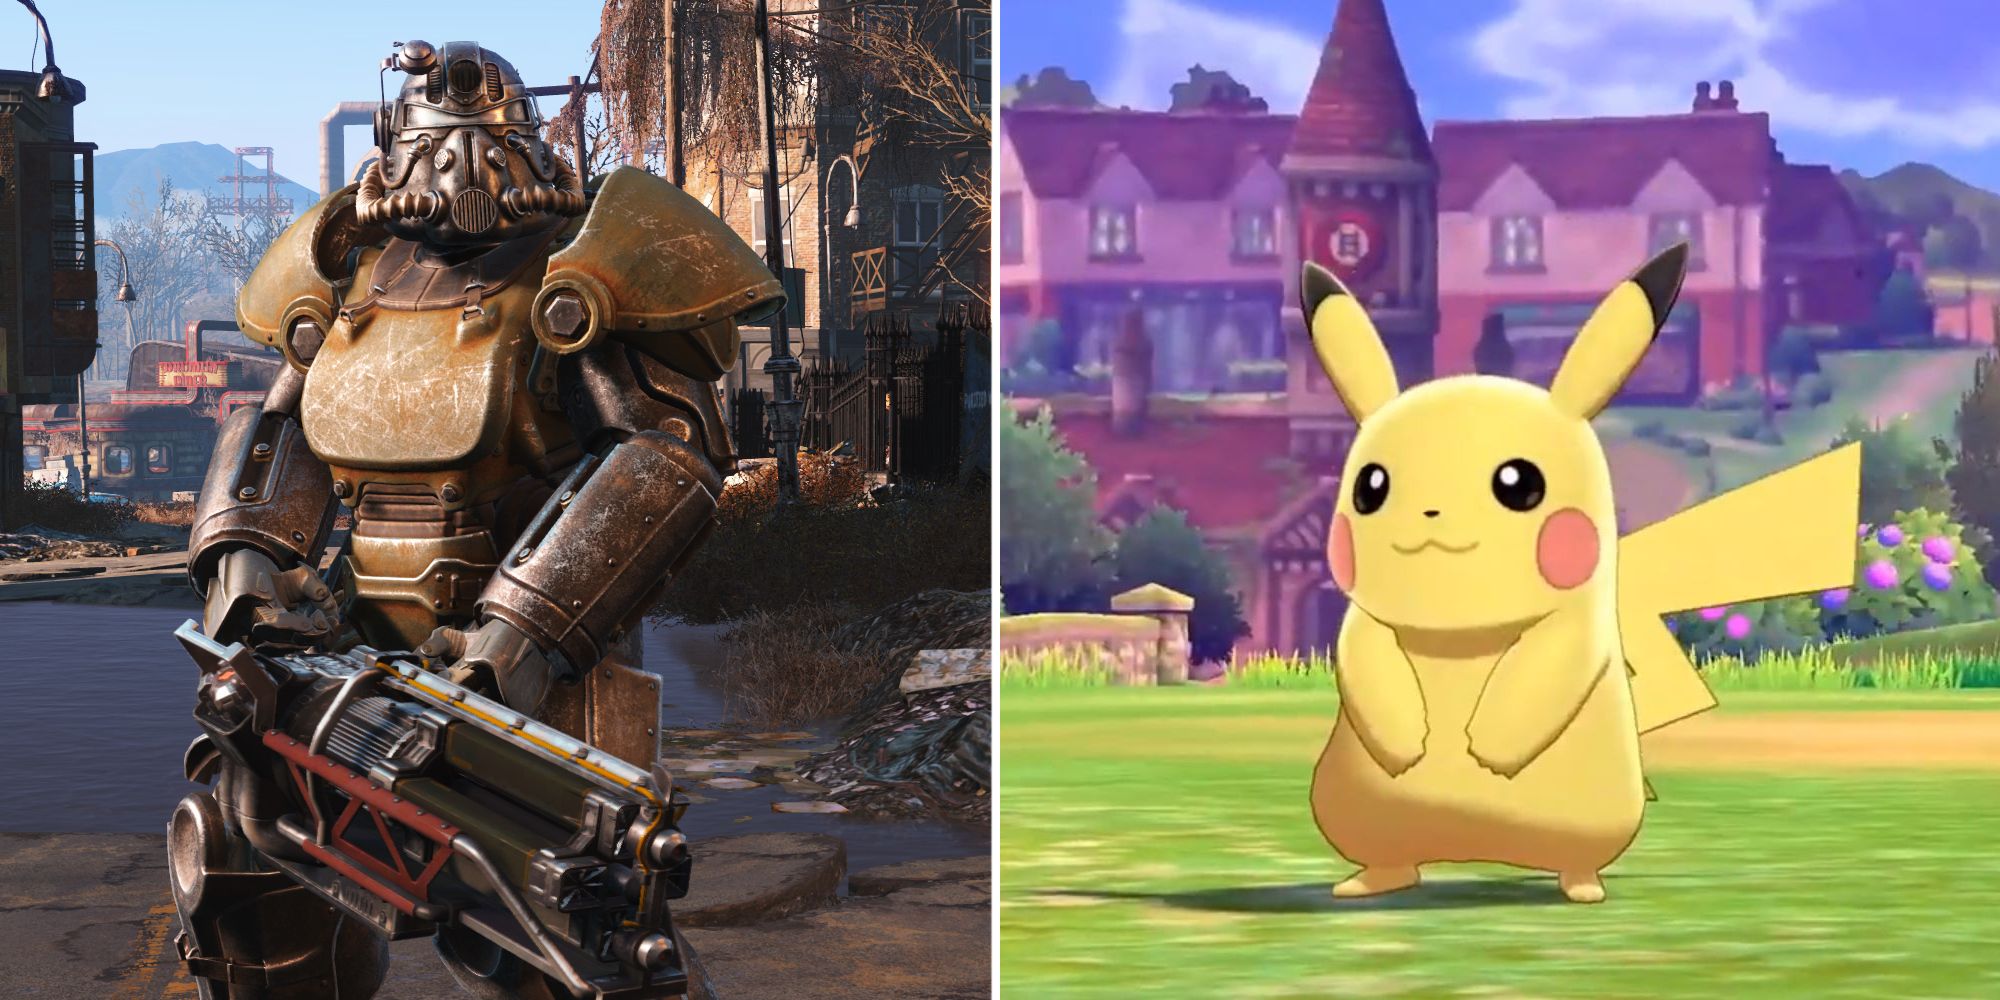 Character in Power Armor in Fallout 4 and Pikachu from Pokemon Sword and Shield